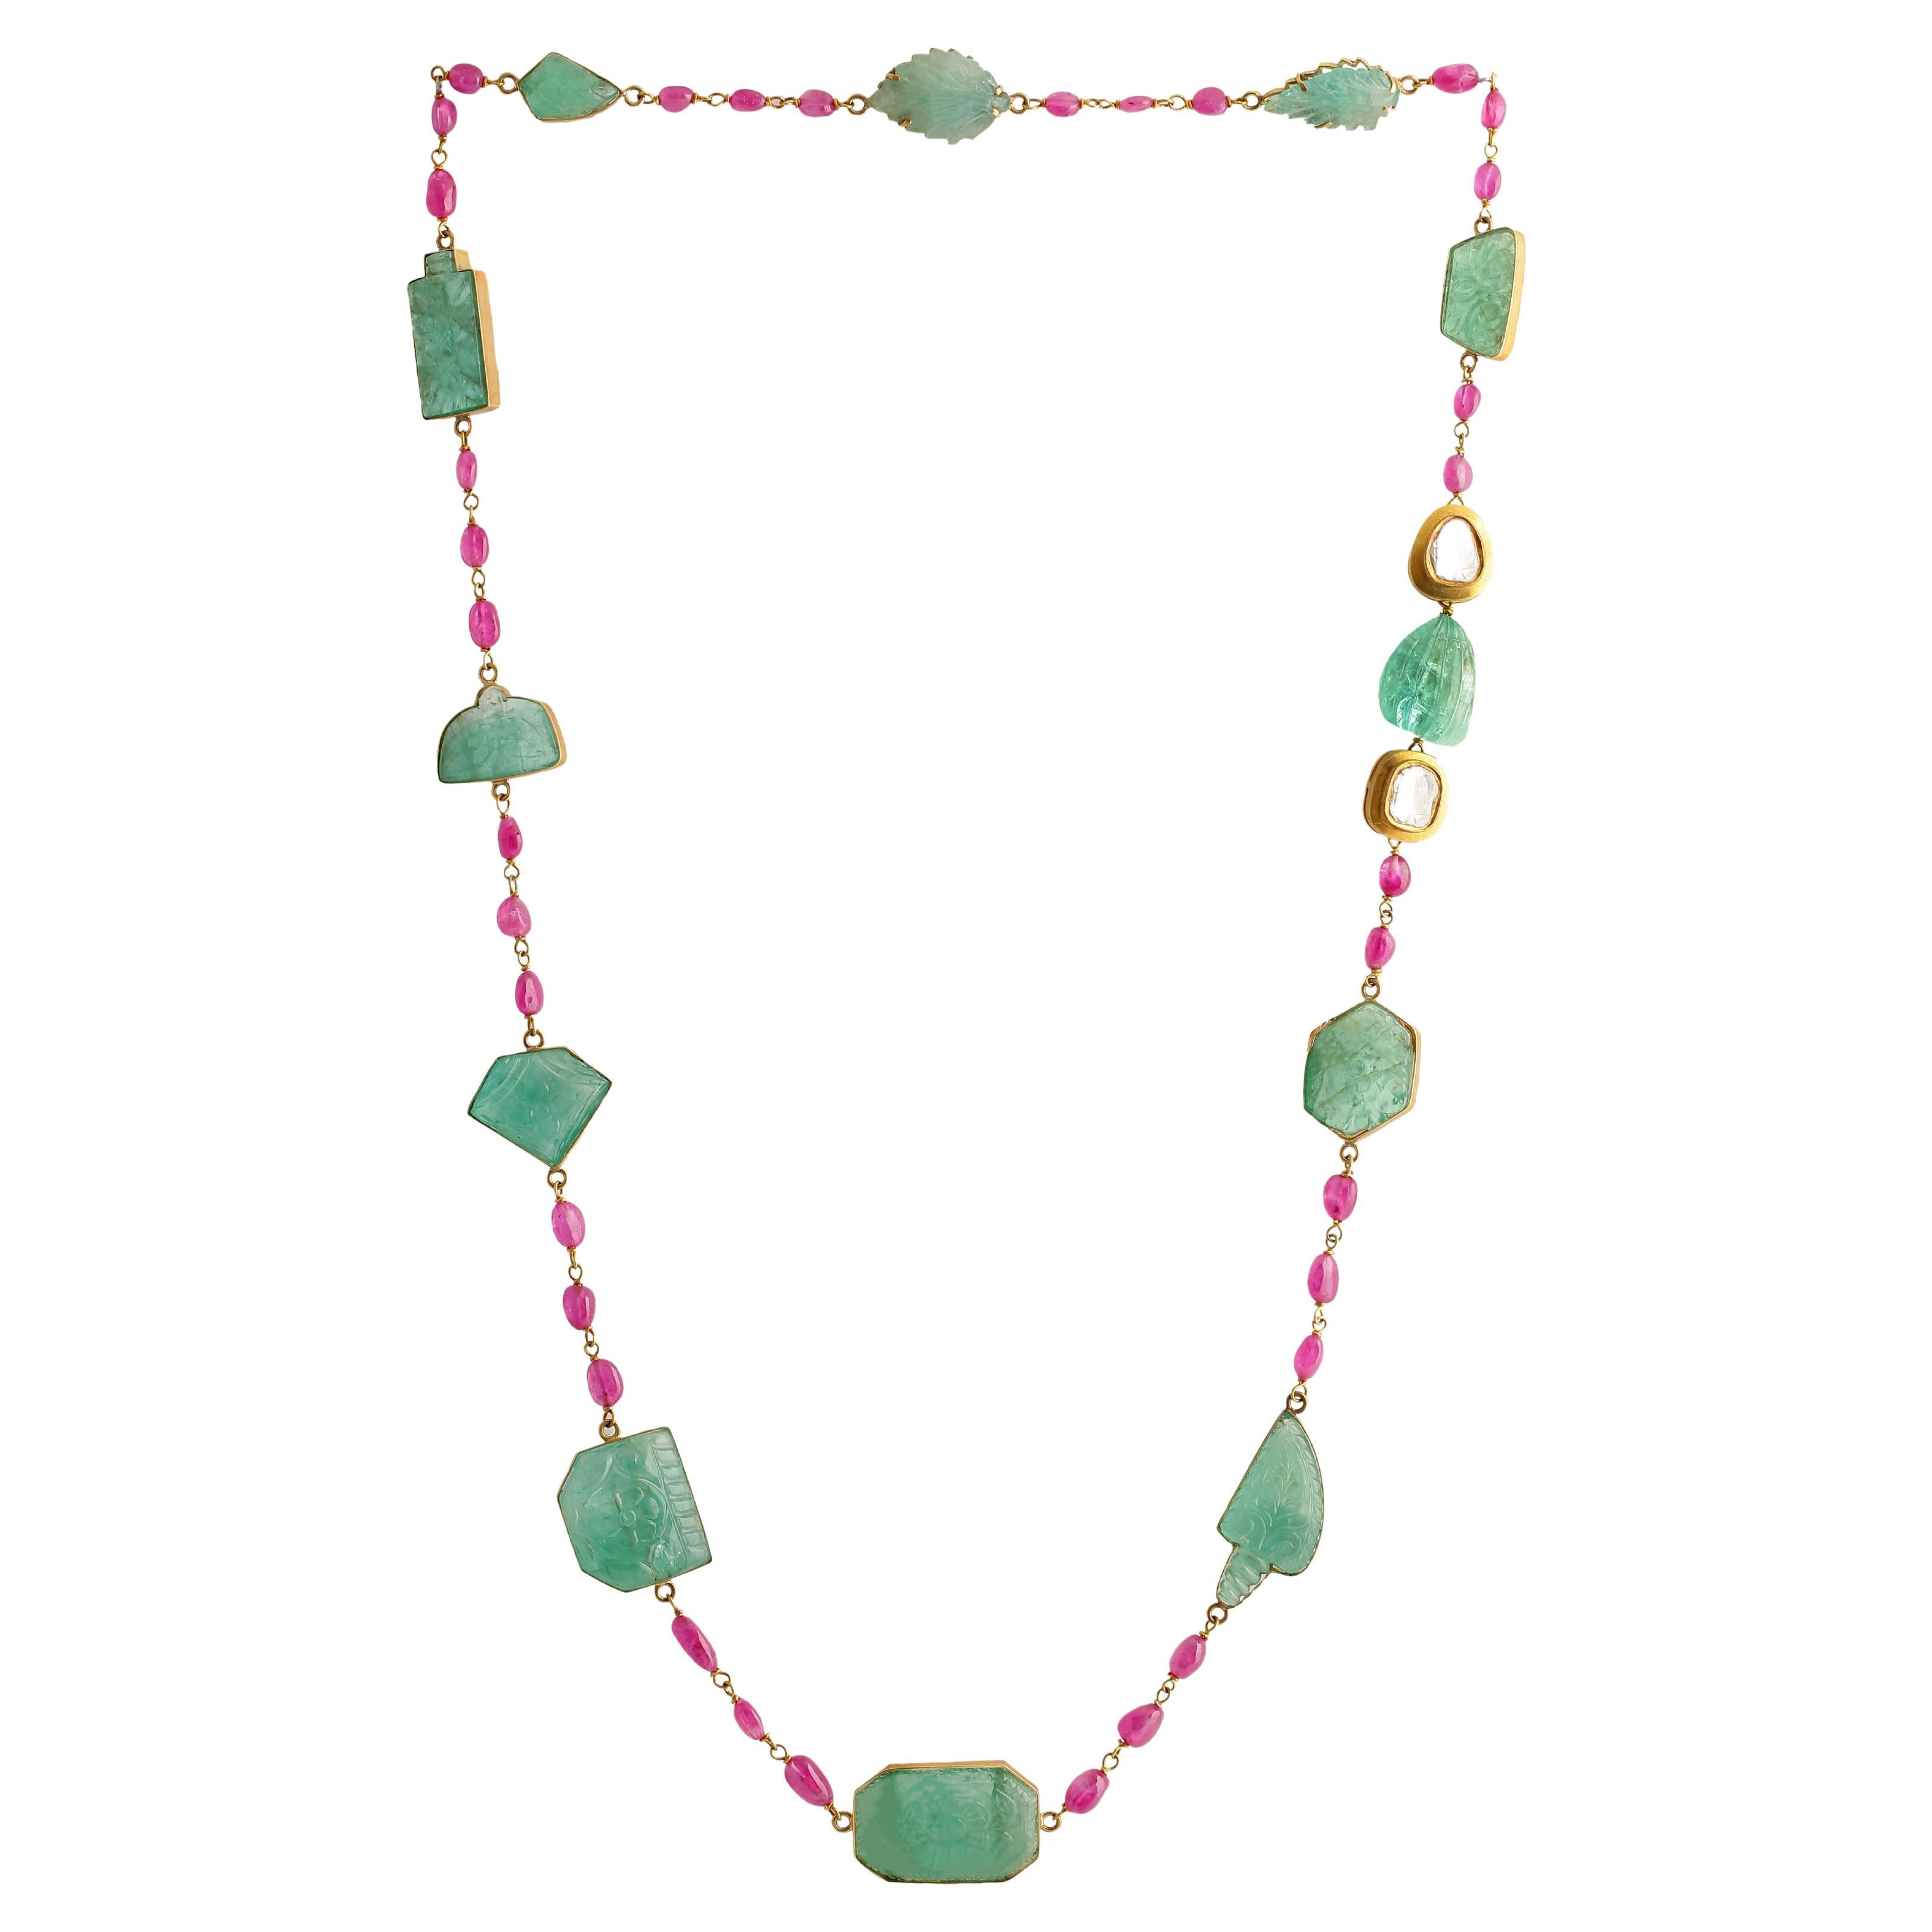 Emerald Carvings and Ruby Beads Necklace with a Rosecut Diamond Set in 18K Gold